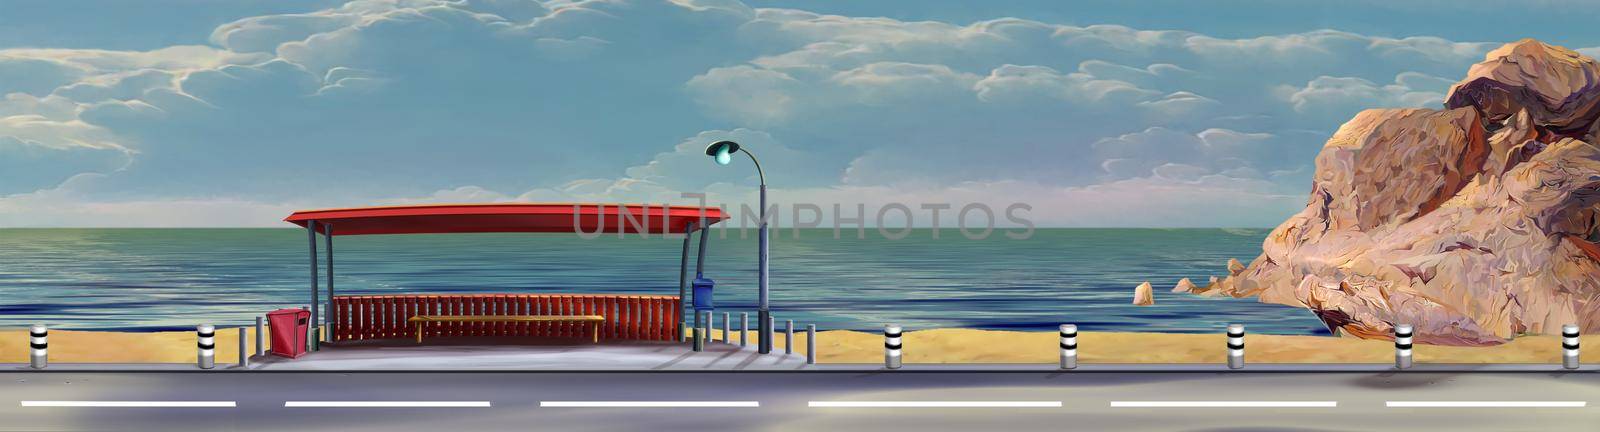 Bus stop on a Scenic road illustration by Multipedia